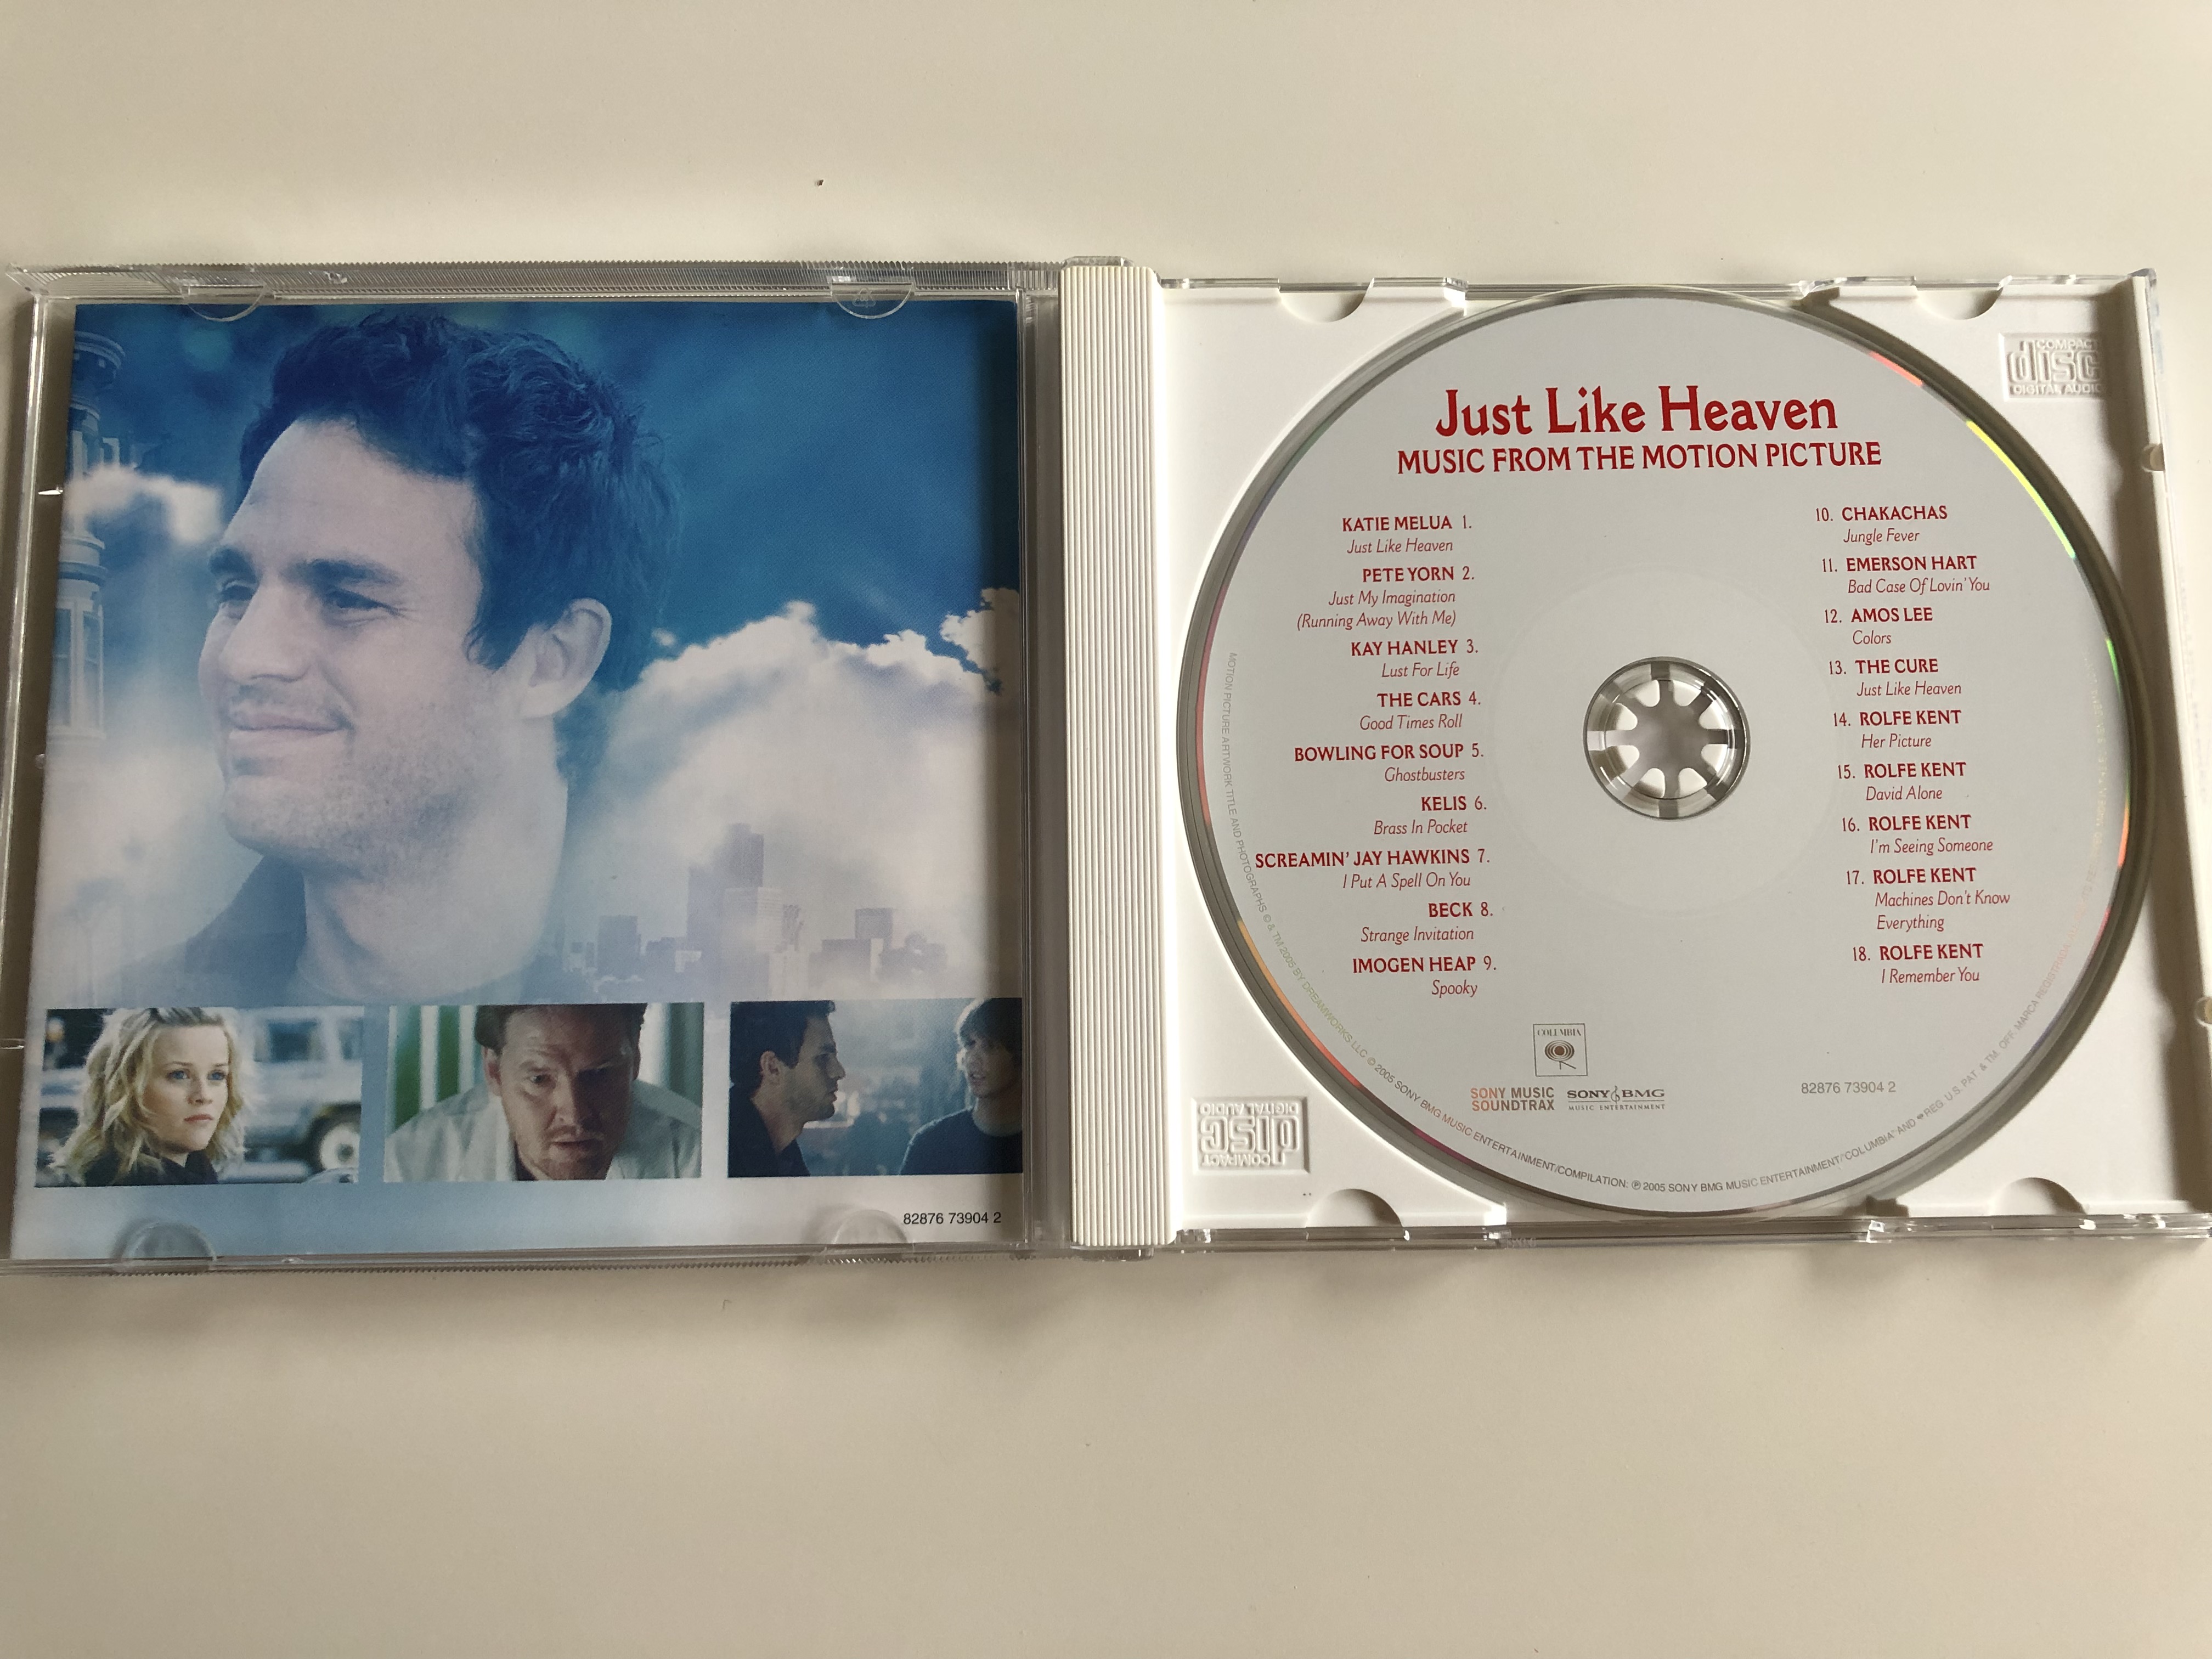 just-like-heaven-ost-music-from-the-motion-picture-reese-witherspoon-mark-ruffalo-audio-cd-2005-columbia-records-sony-bmg-2-.jpg